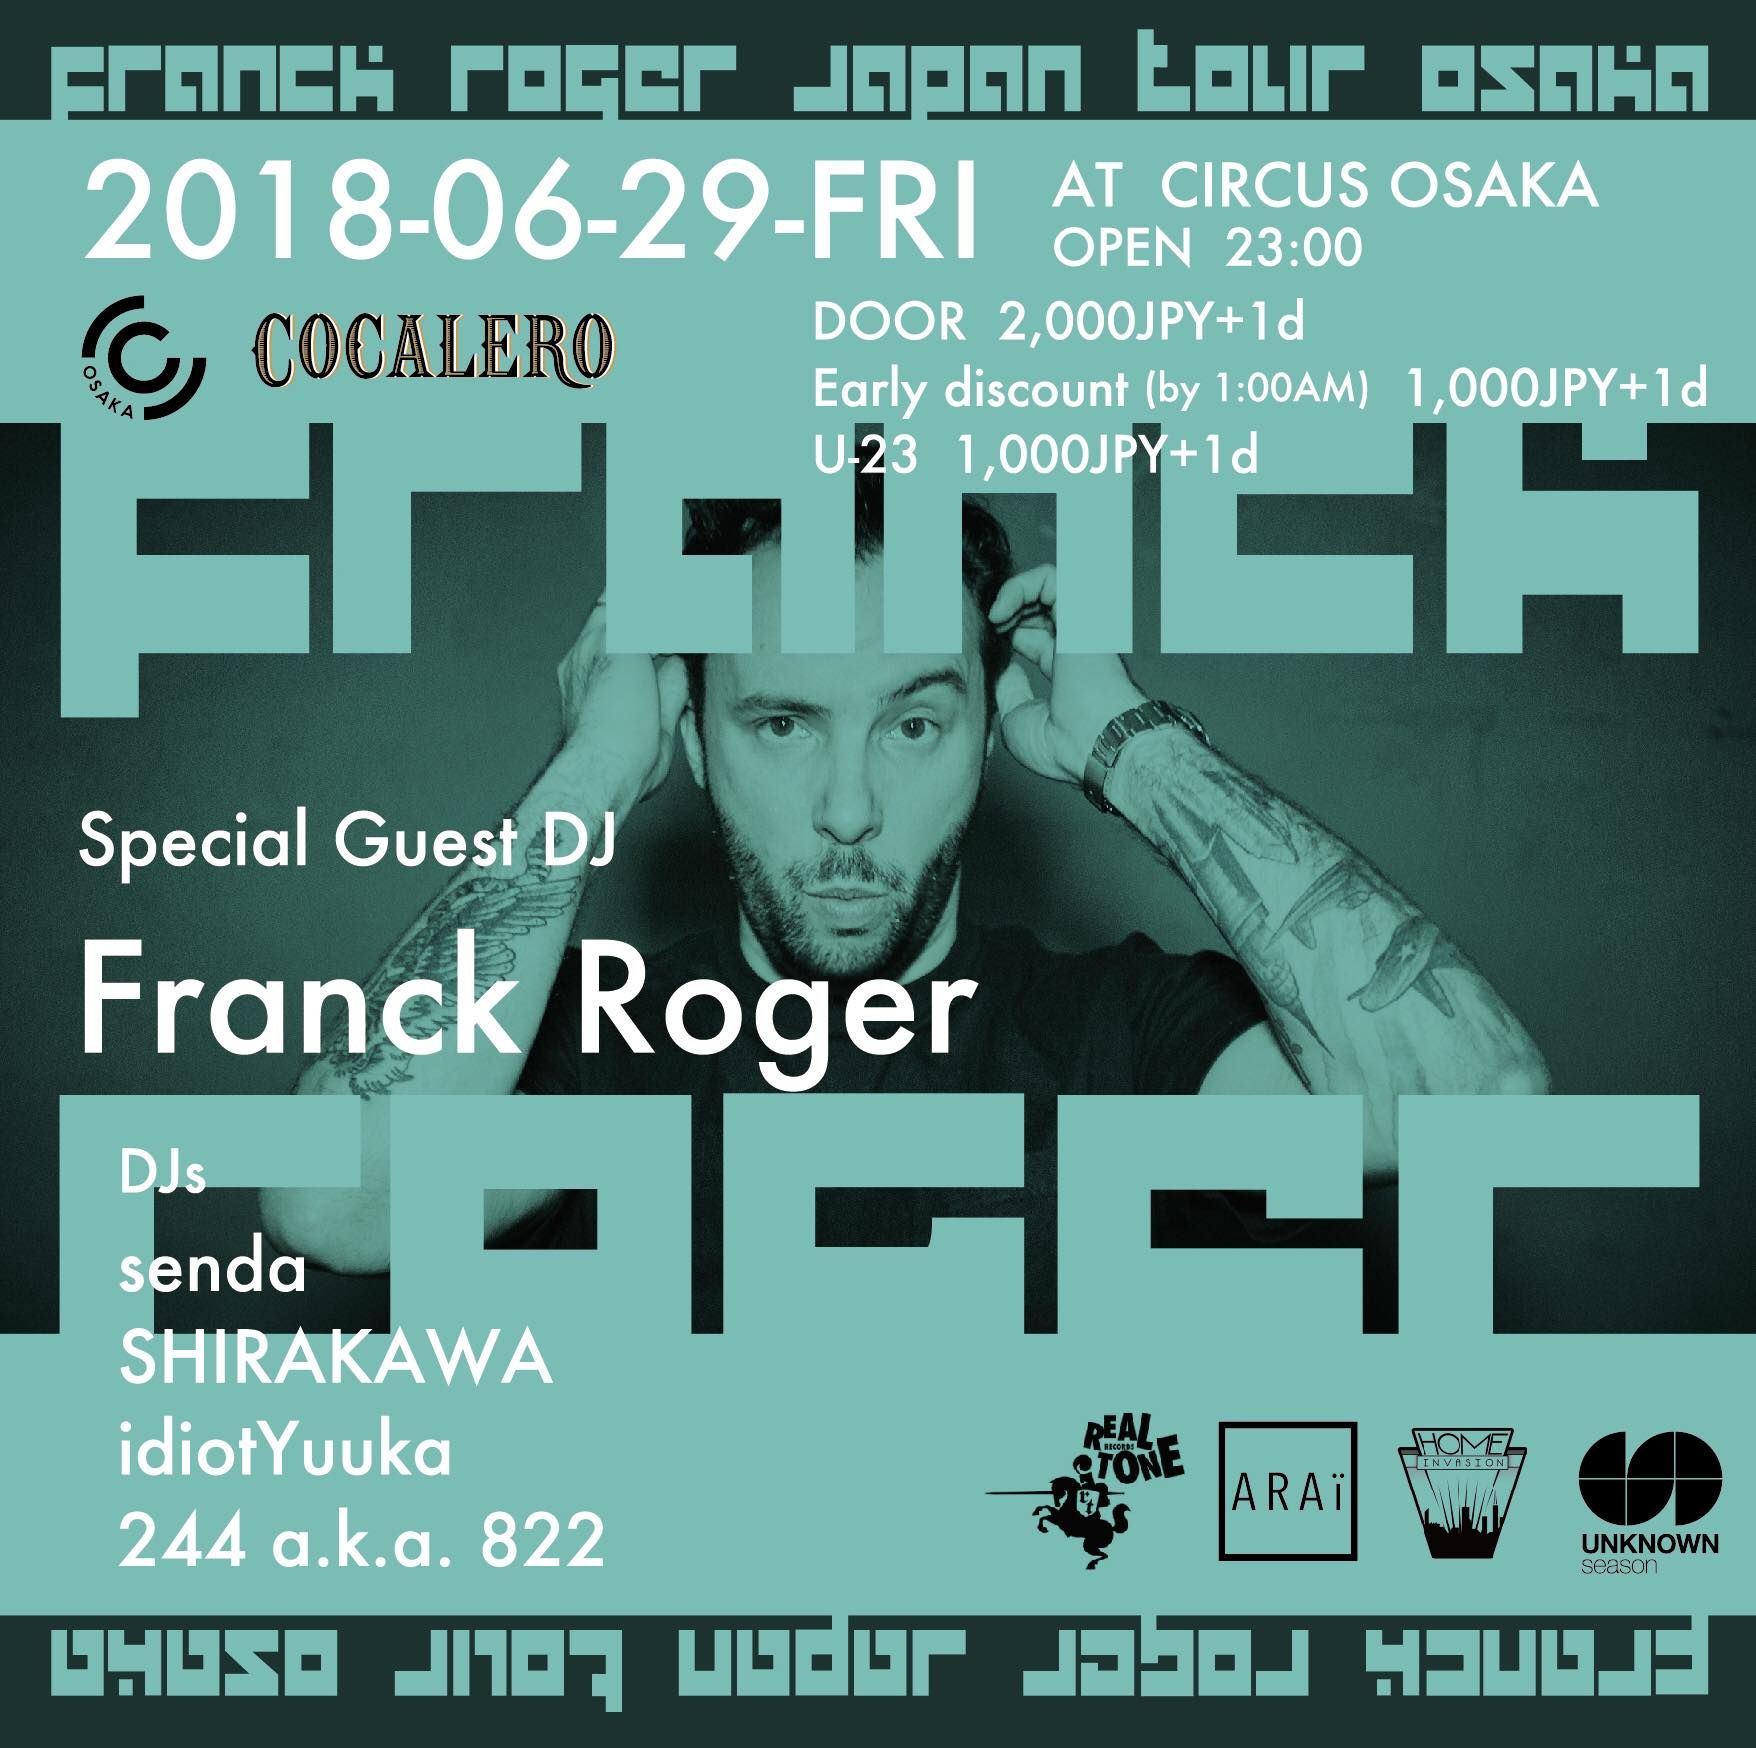 Franck Roger Japan Tour 2018 in Osaka supported by COCALERO